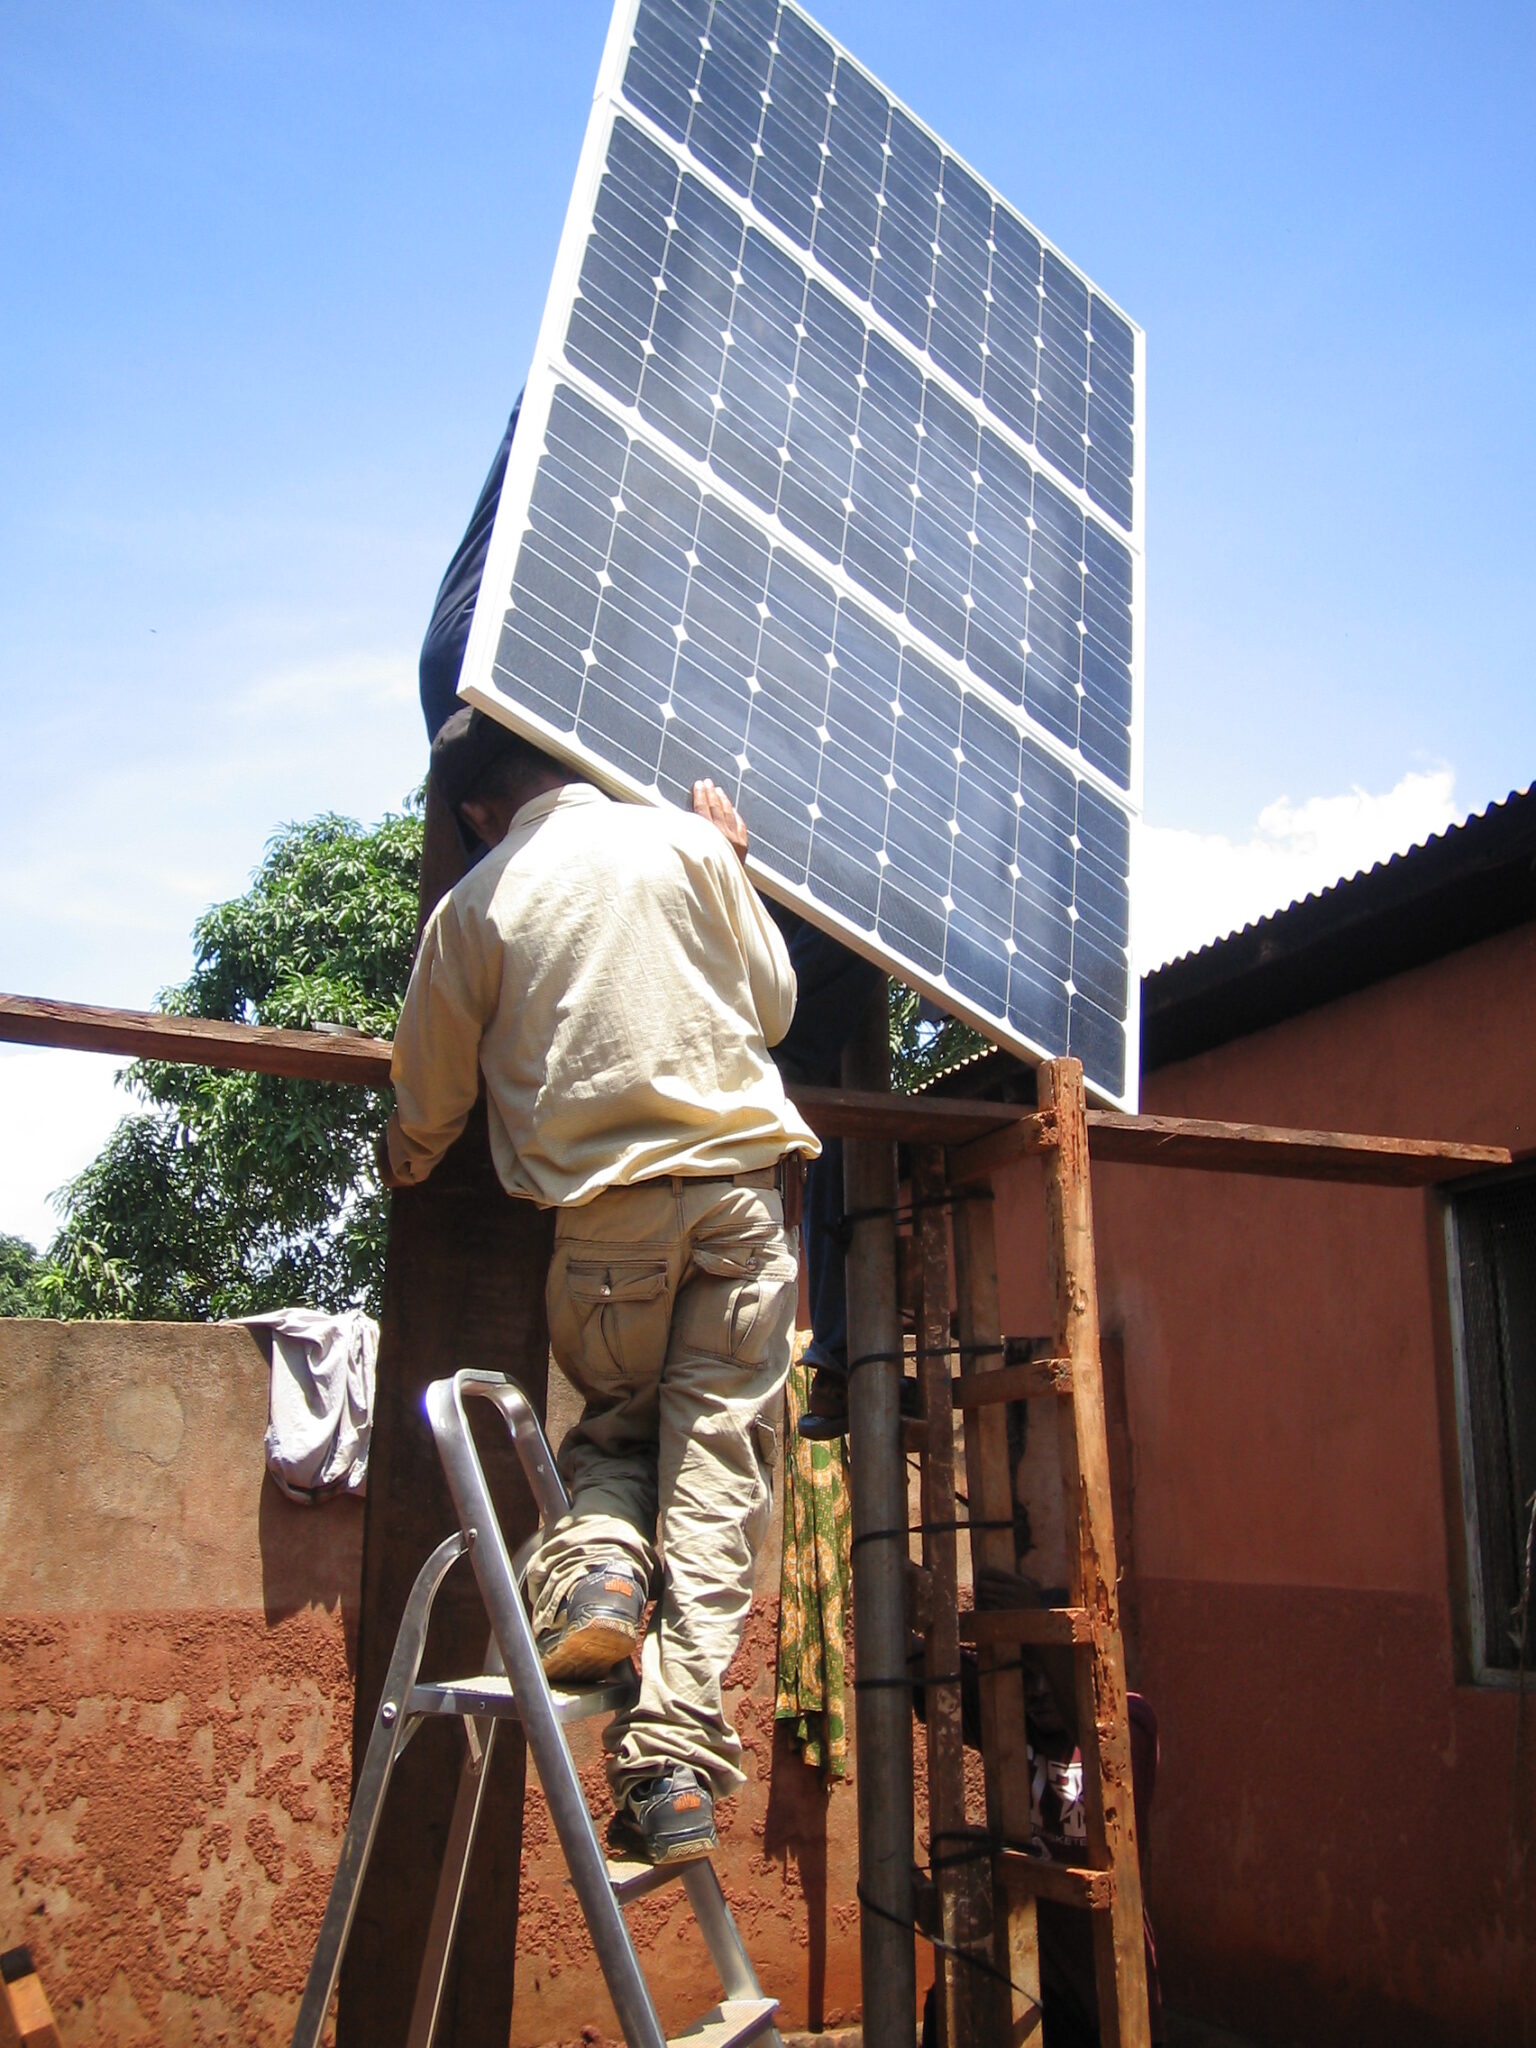 Two men set up solar panels on a rooftop as part of a sustainable development project